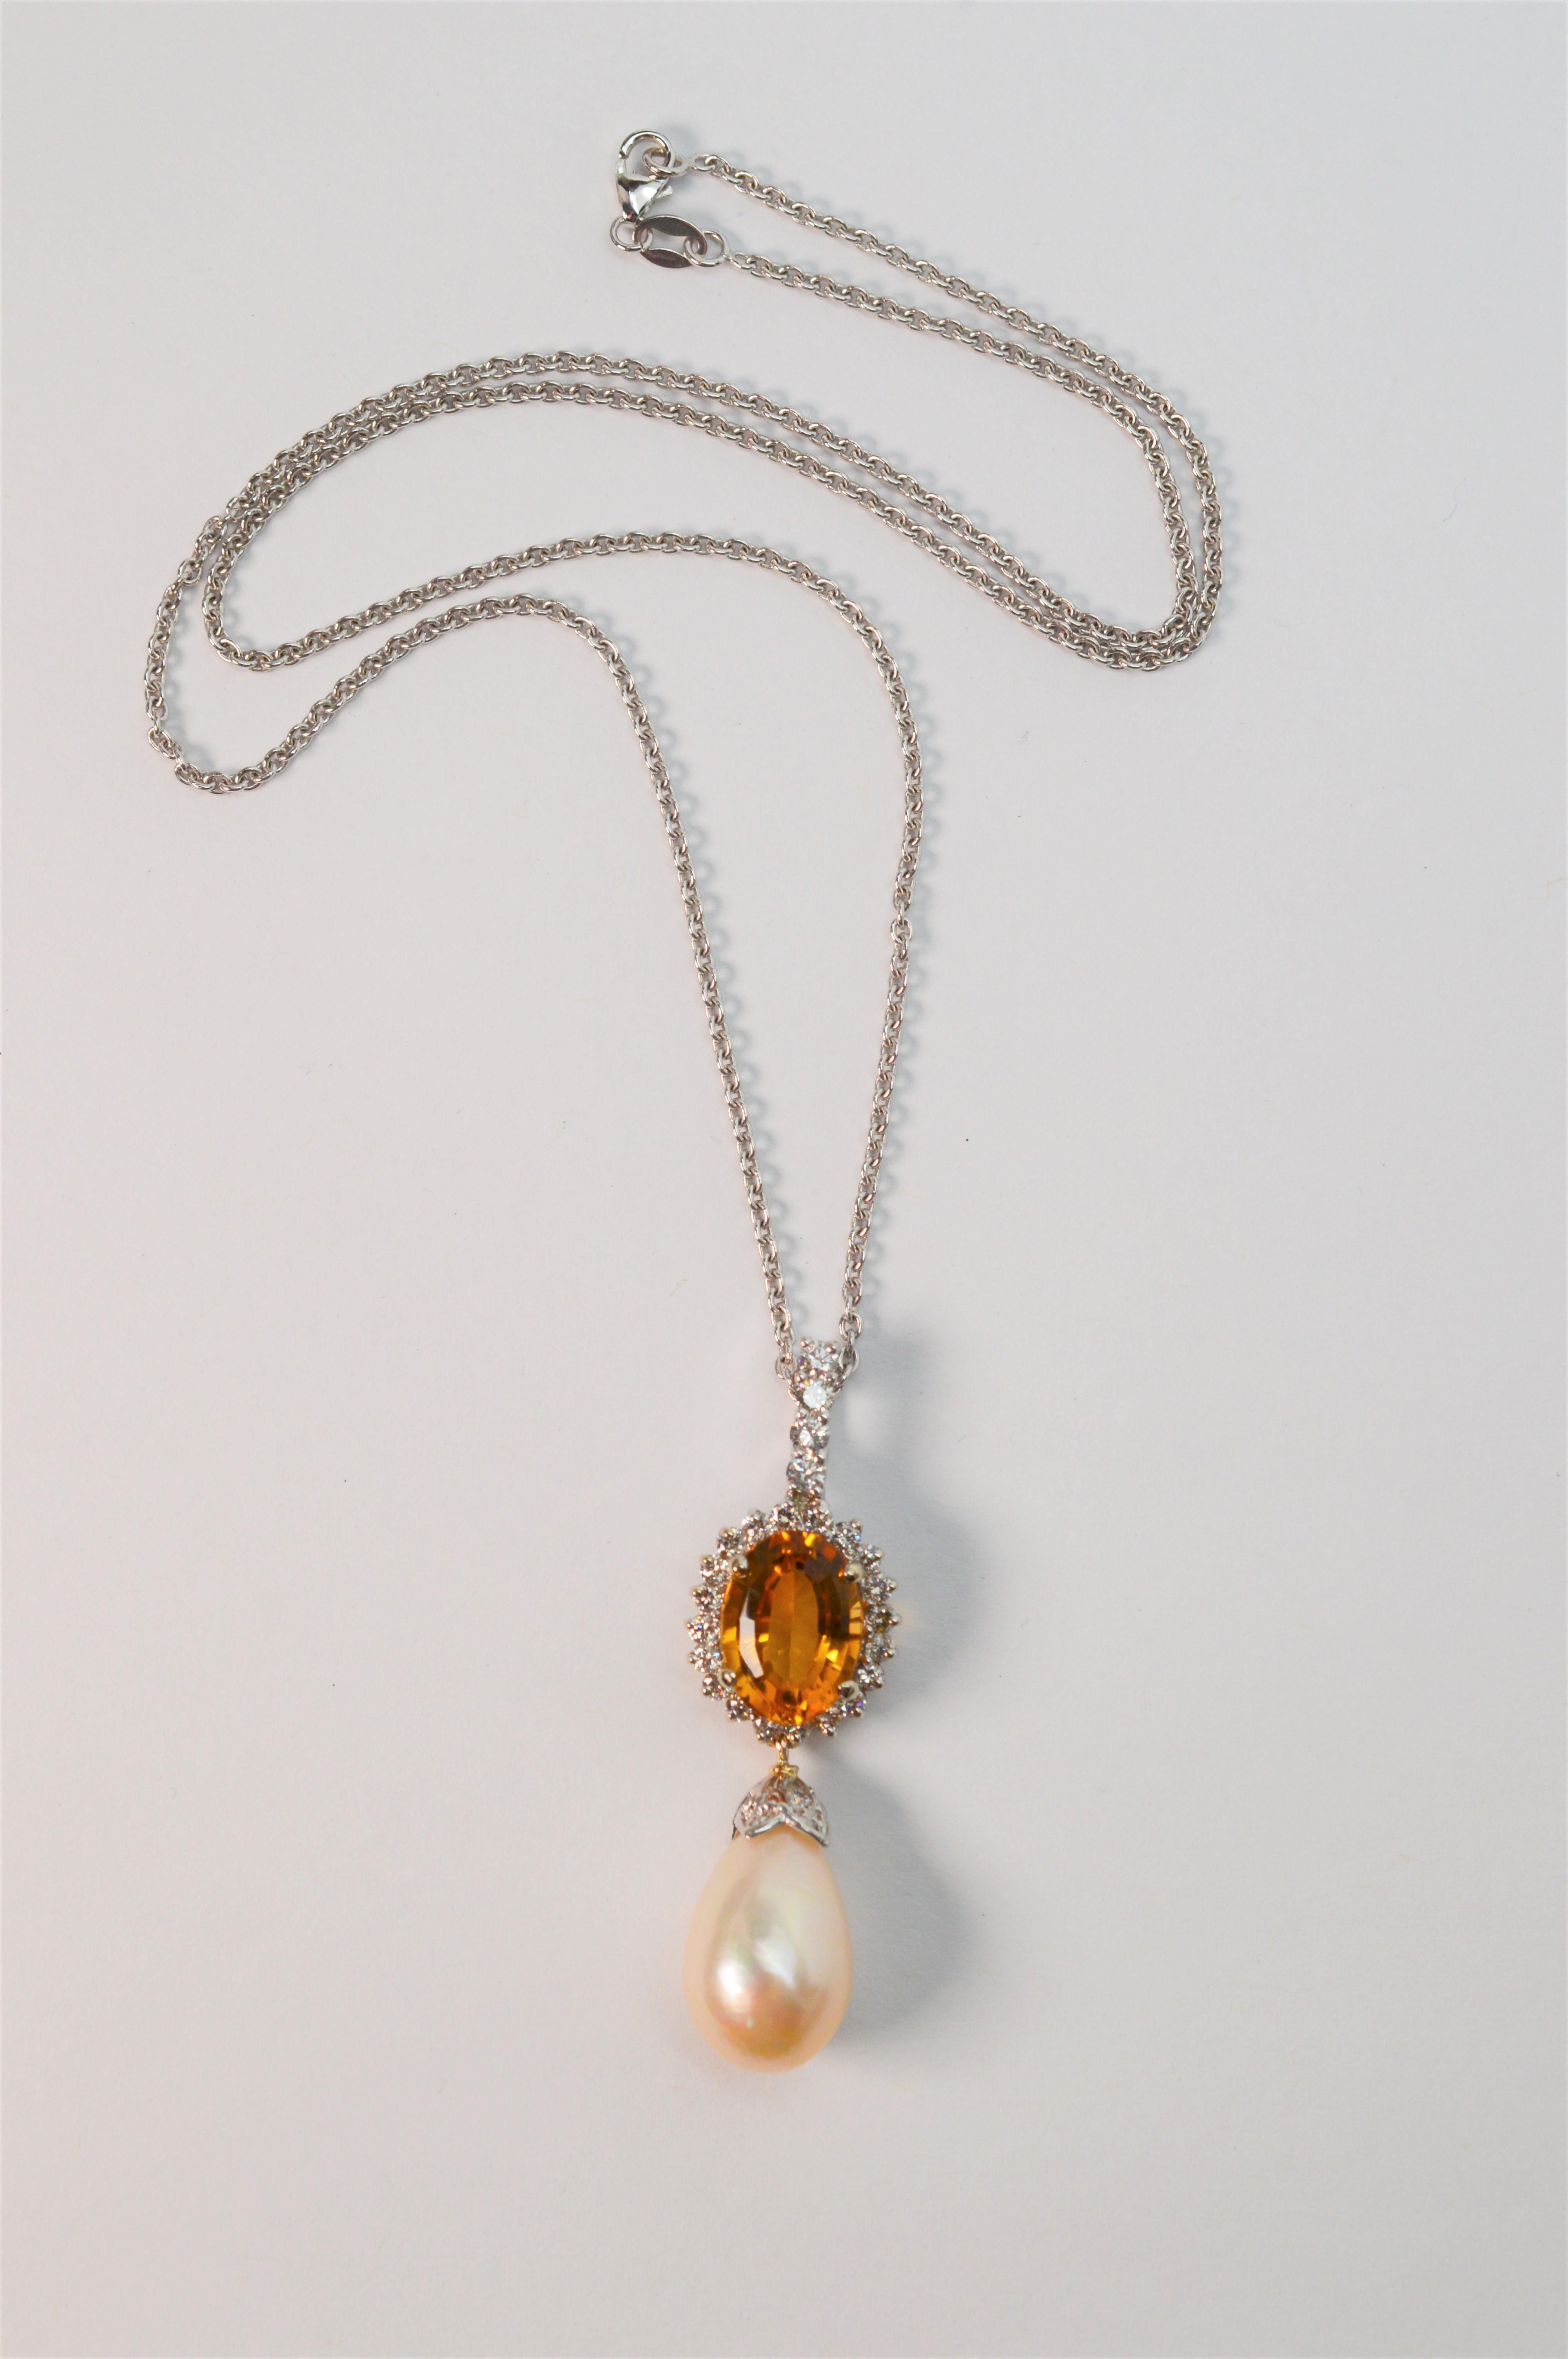 The undeniable fire of a faceted 4.5 carat oval citrine set aglow by sparkling rock crystal accents adds to the regal drama of the genuine 11 mm tear drop shaped pearl pendant. Italian made and created in fourteen karat 14K white gold, this elegant